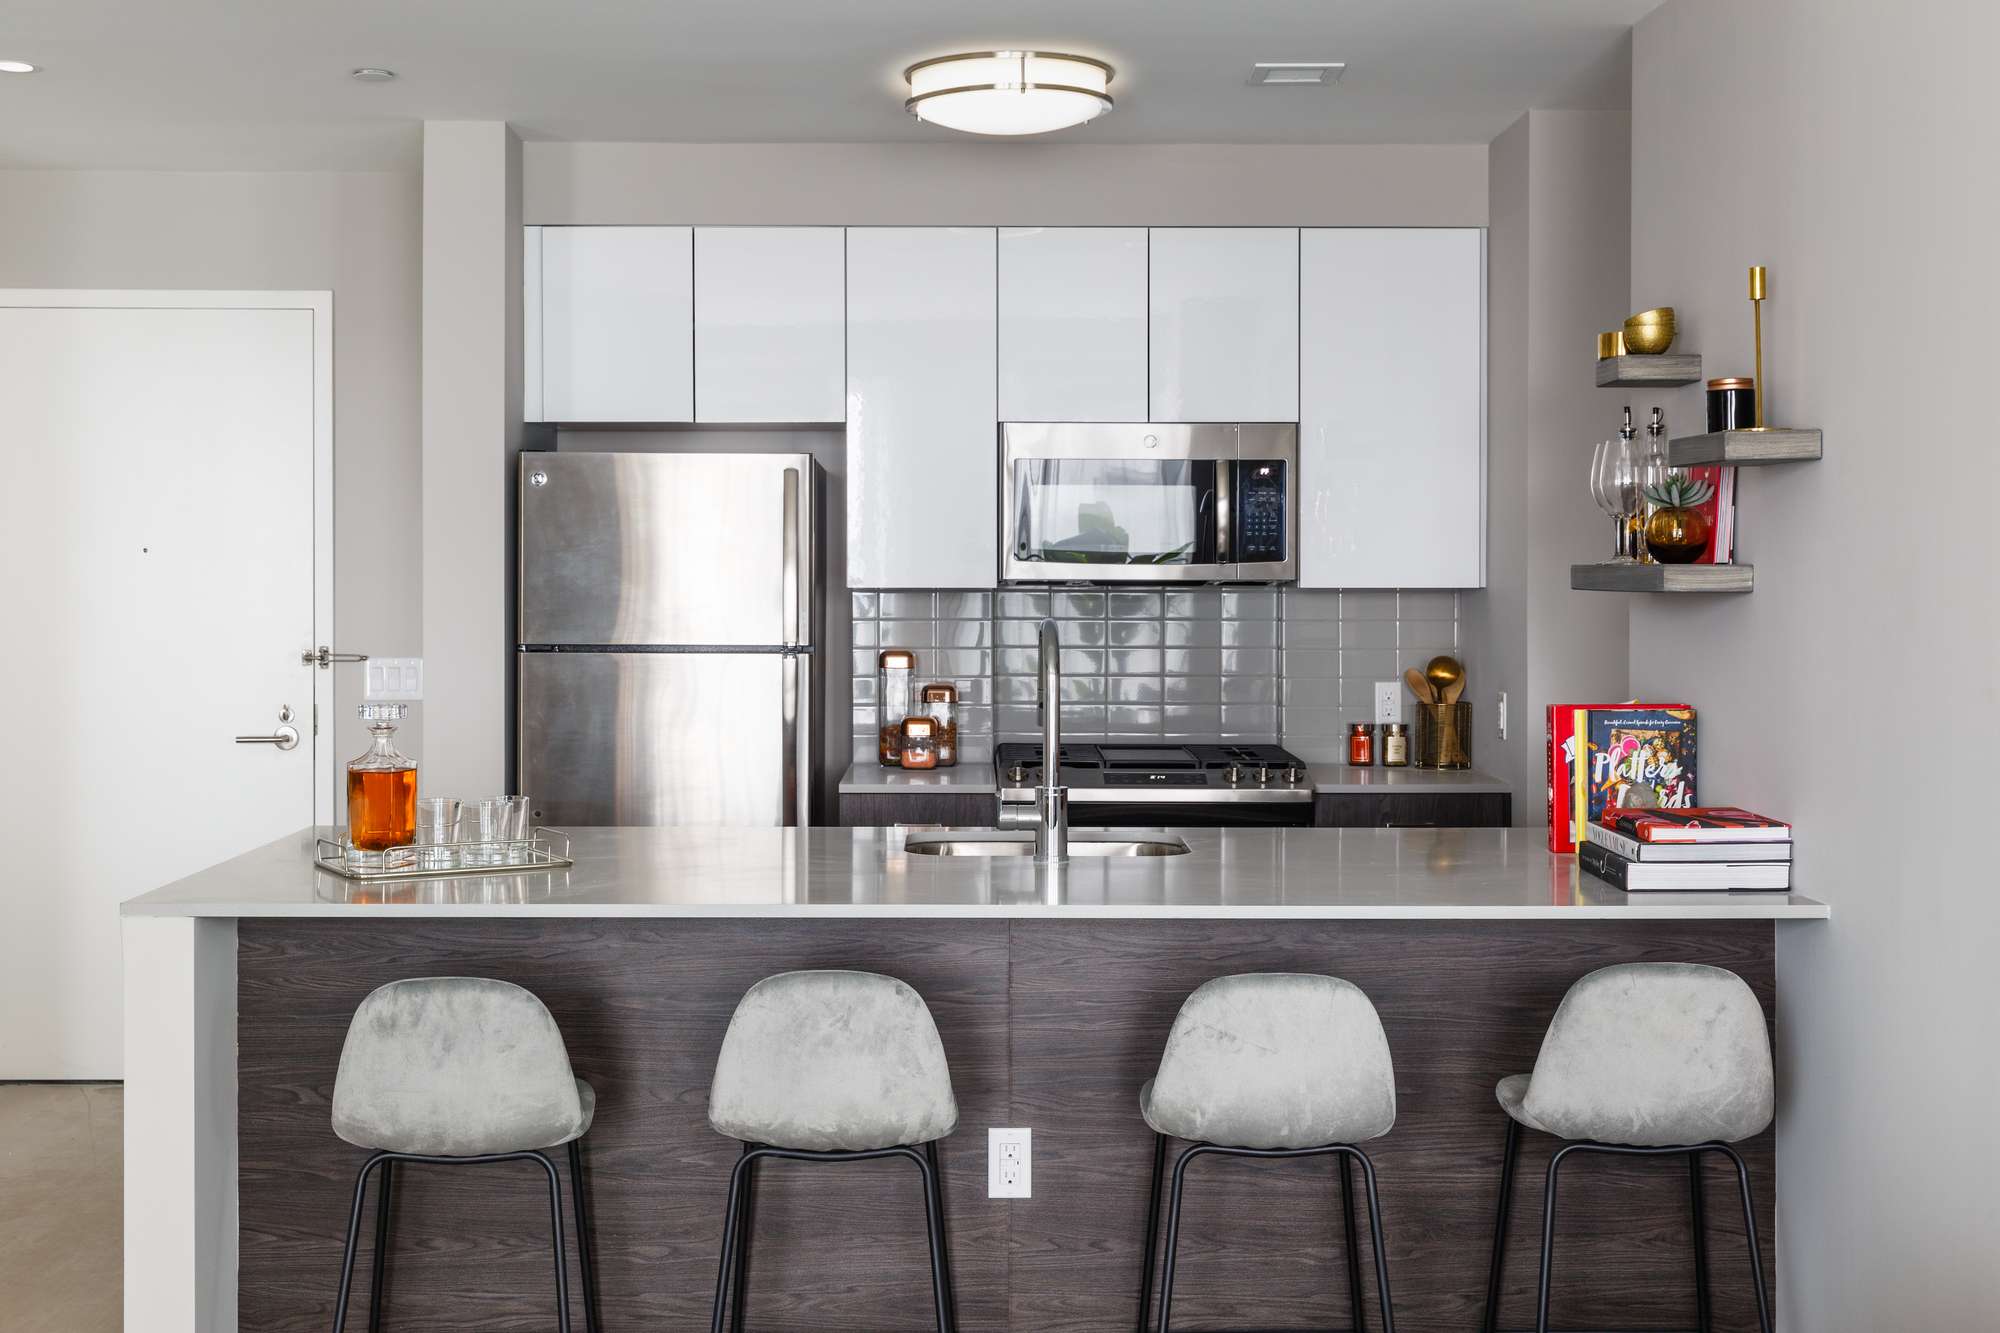 Modern galley kitchen with white cabinets, stainless steel appliances, seating counter with 4 bar stools near entrance